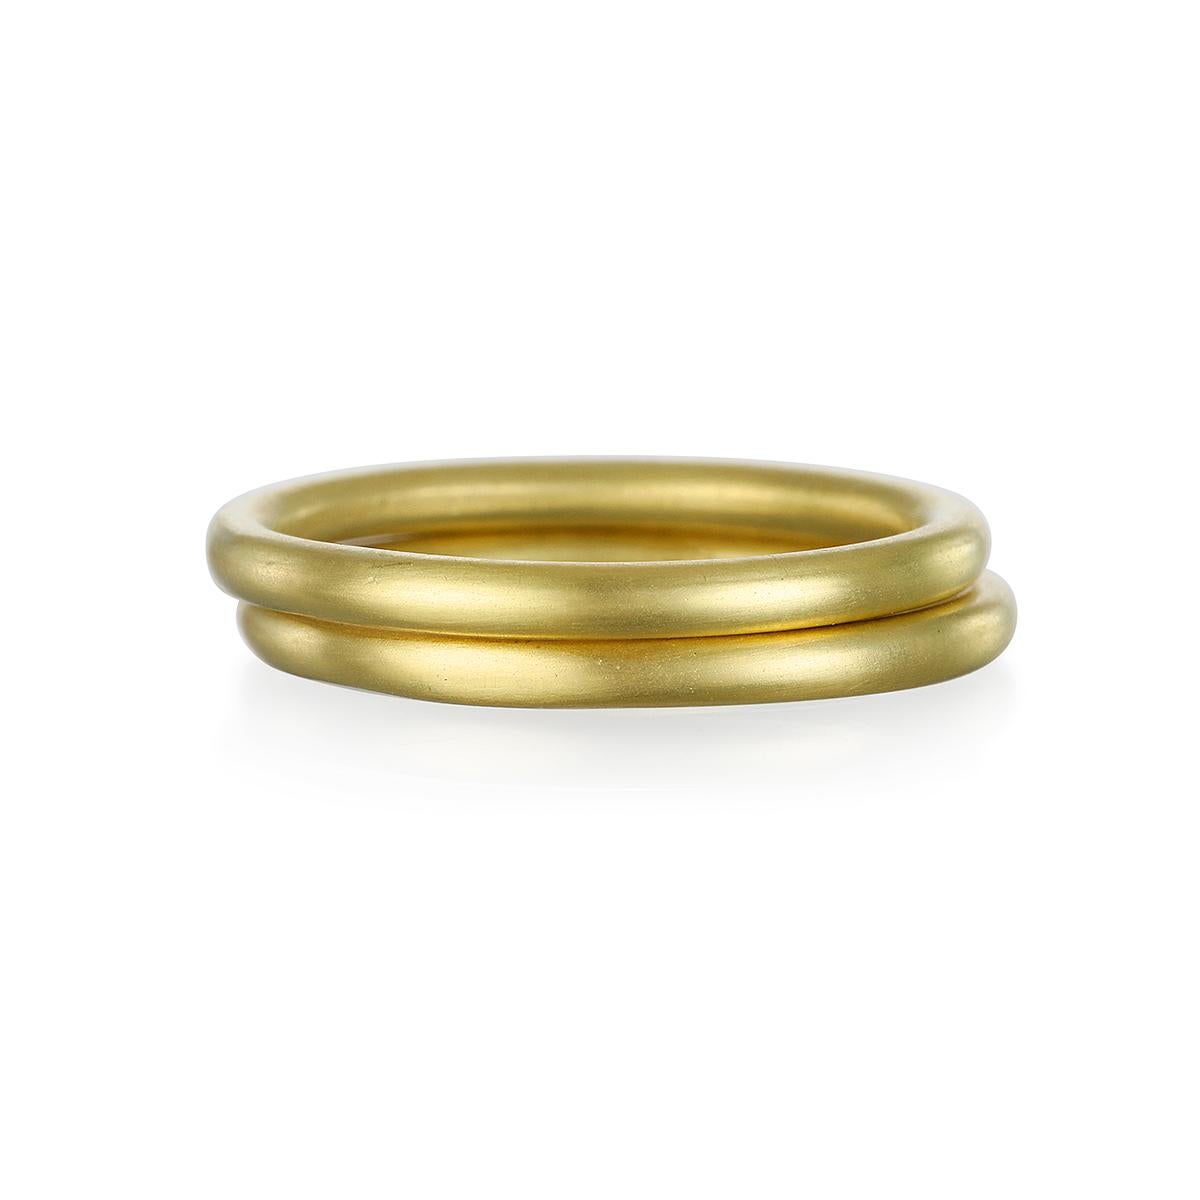 Handmade in 18k gold* with a matte finish, Faye Kim's 2mm round band is classic and versatile and a perennial favorite. Wear alone or stack to create your own unique style.

*In Faye Kim's signature 18k green gold, an alloy comprising 75% pure gold